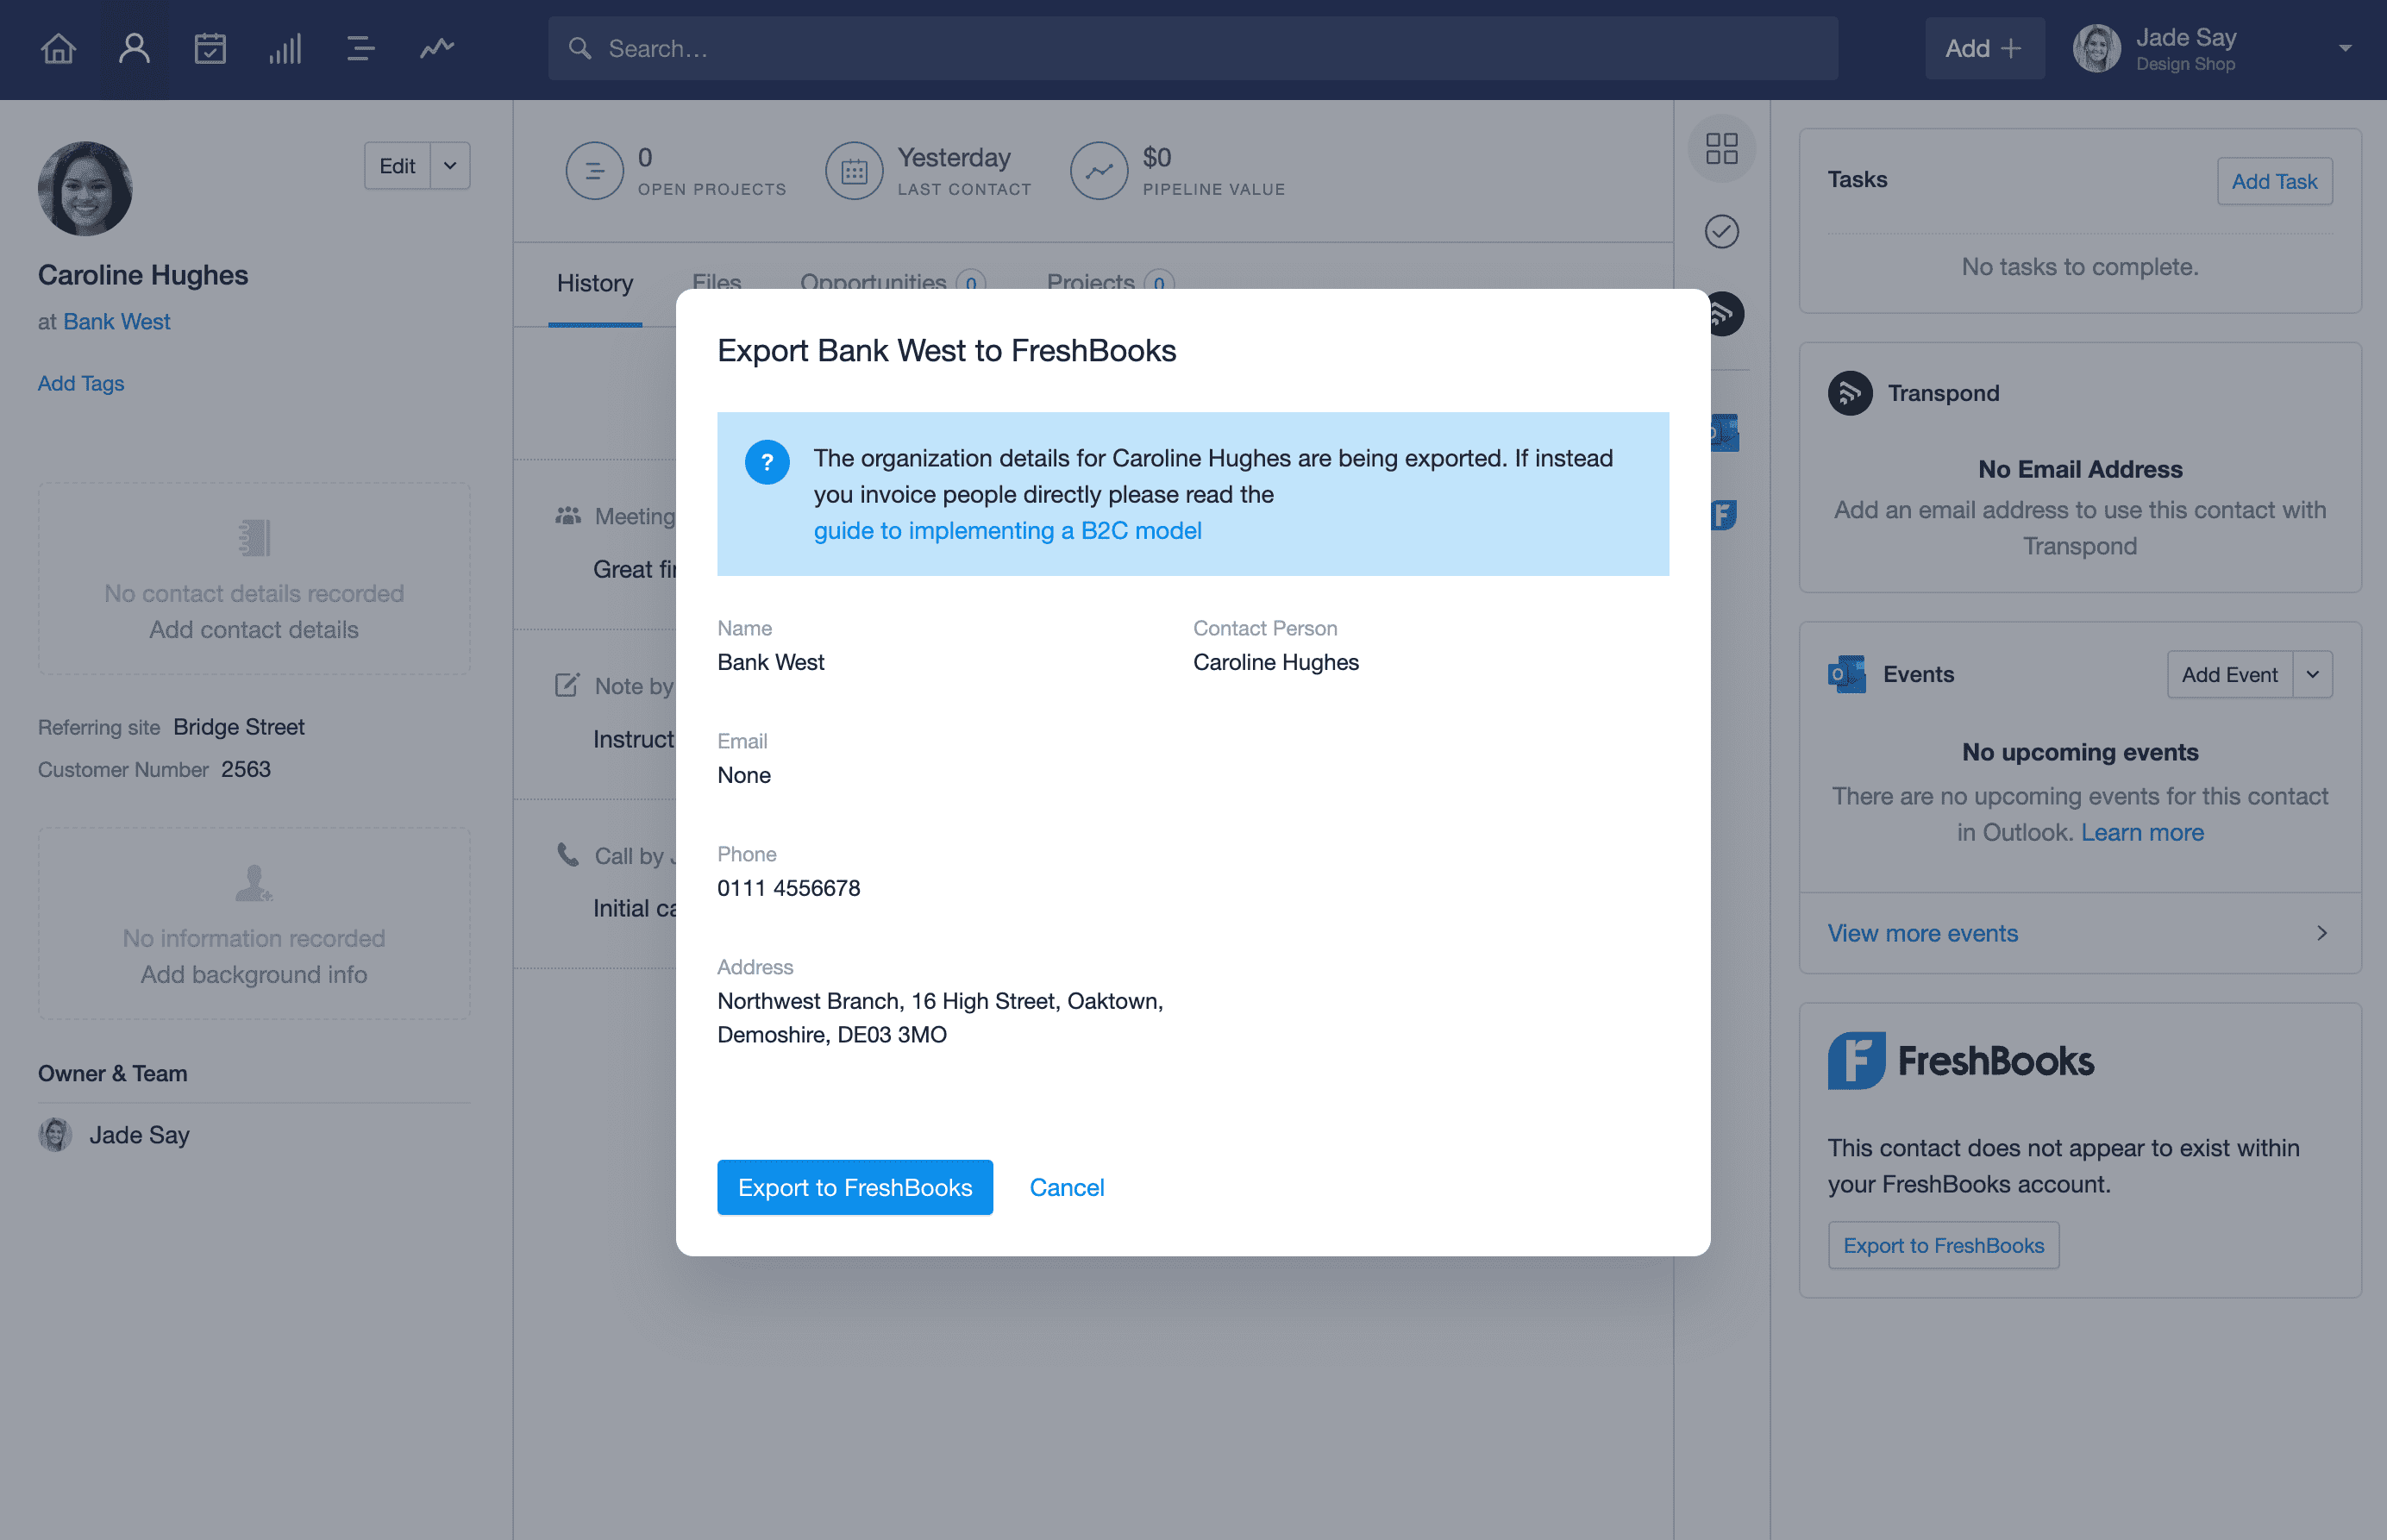 modal with company details and button to export them to FreshBooks